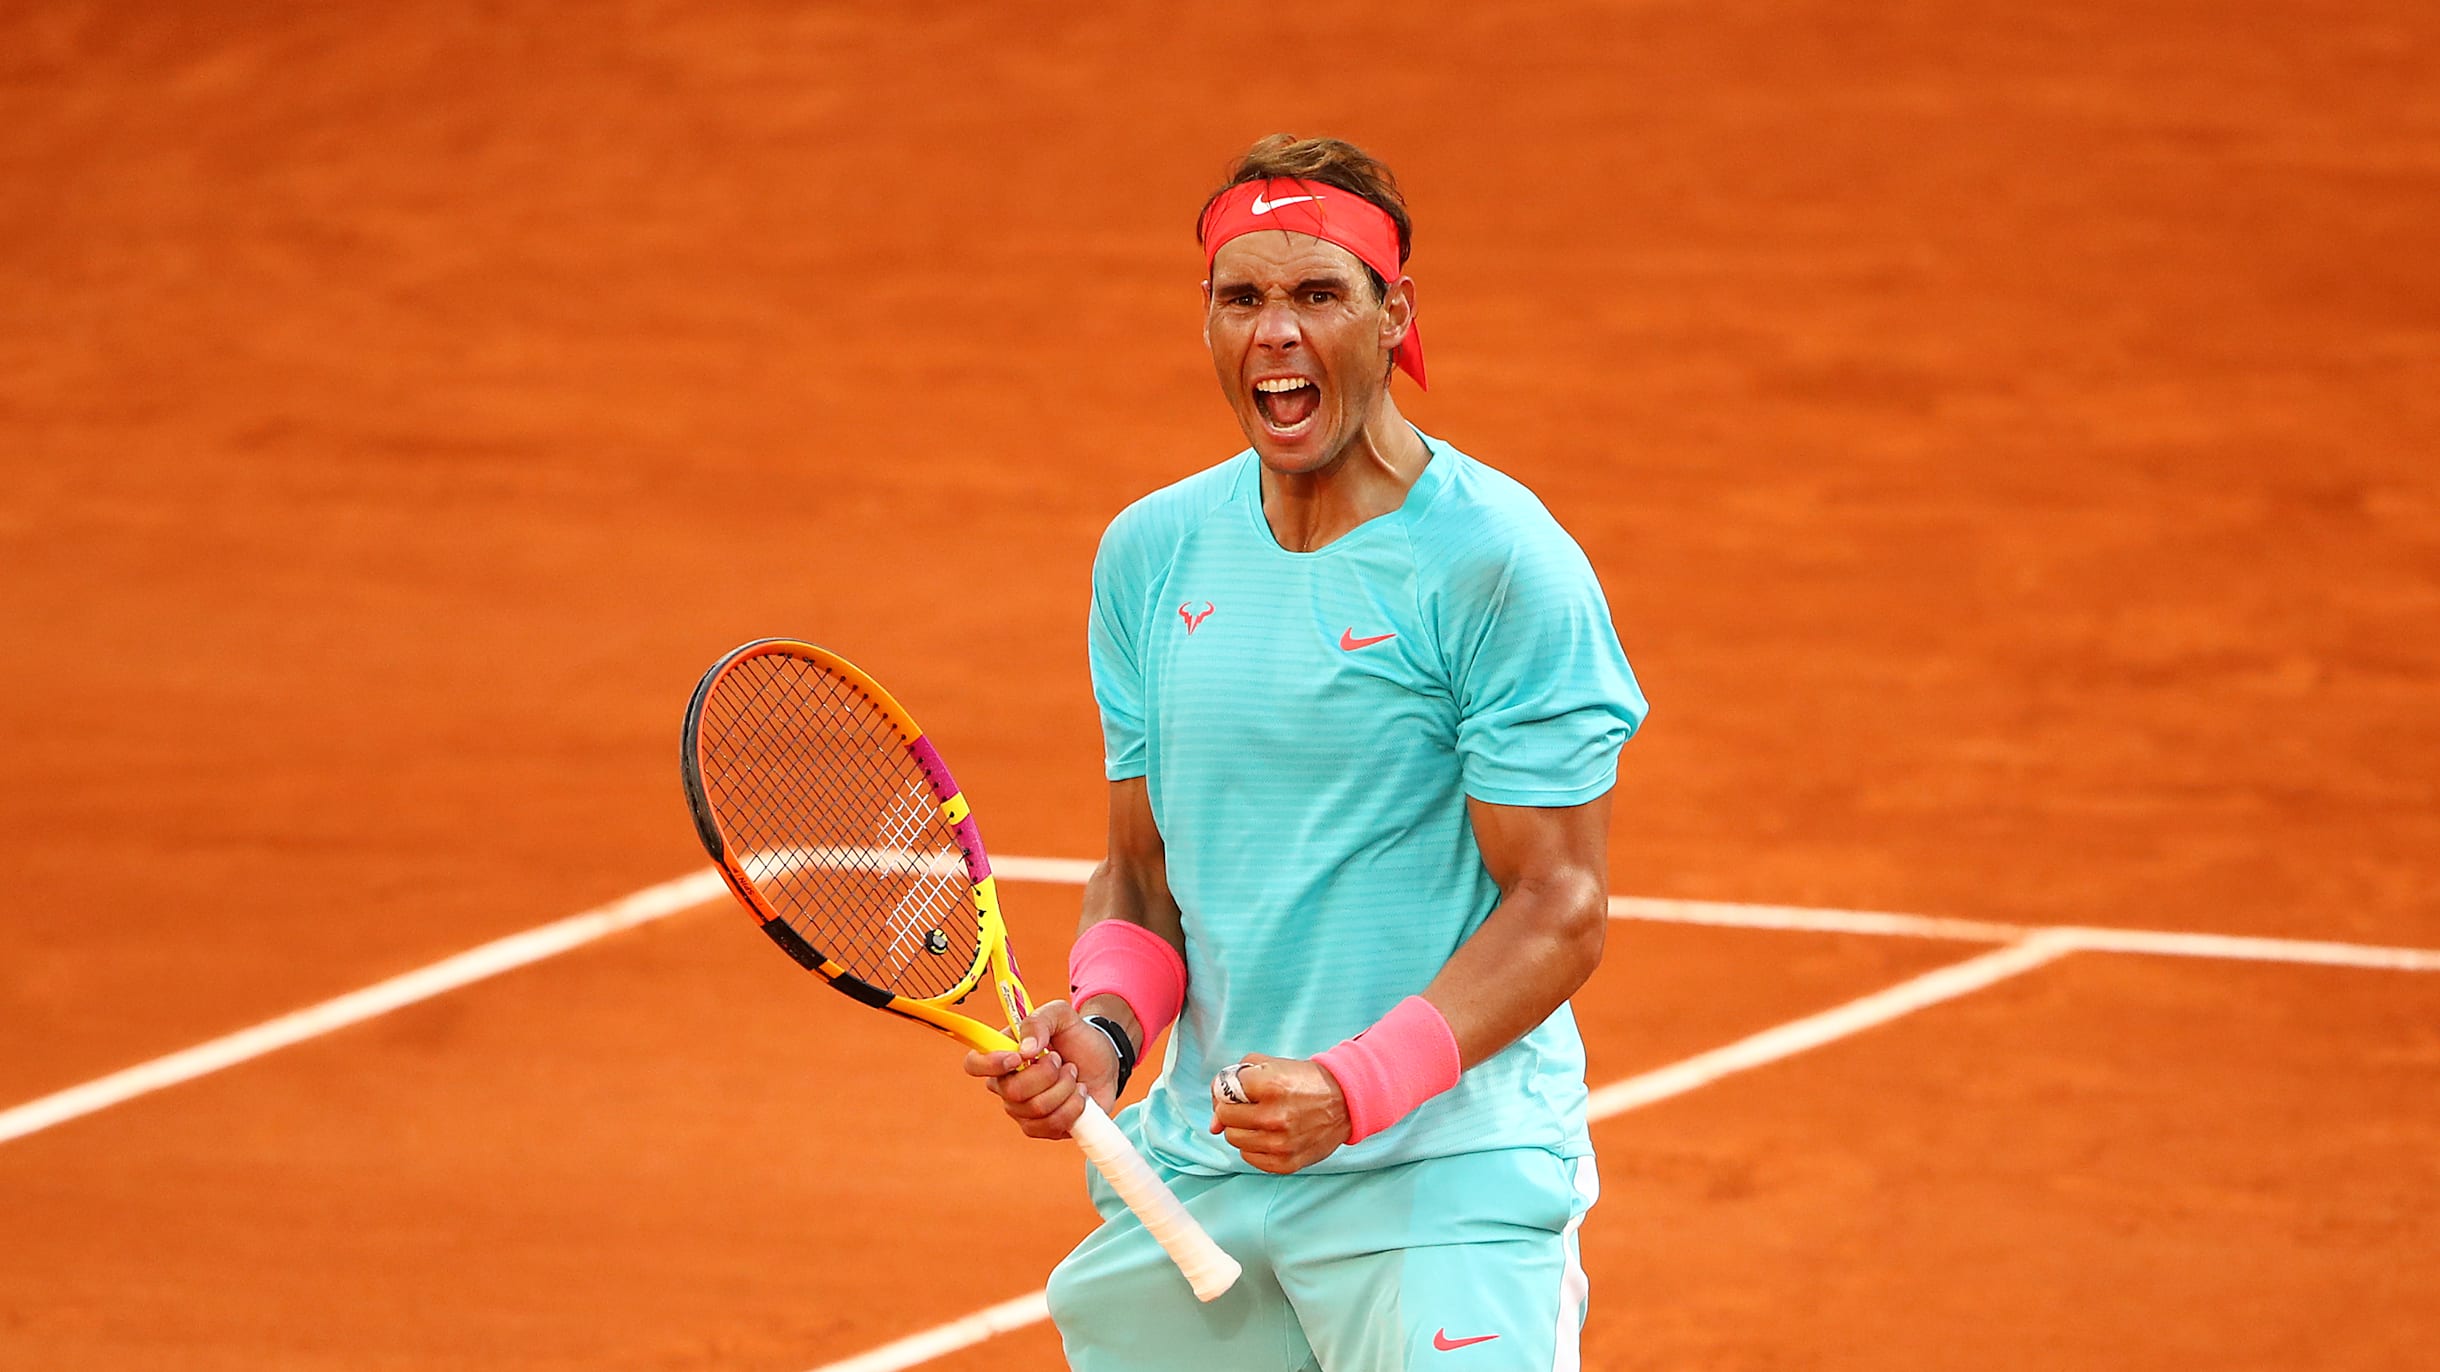 French Open 2021 Defending champs Nadal, Swiatek look for title repeats at tennis clay major